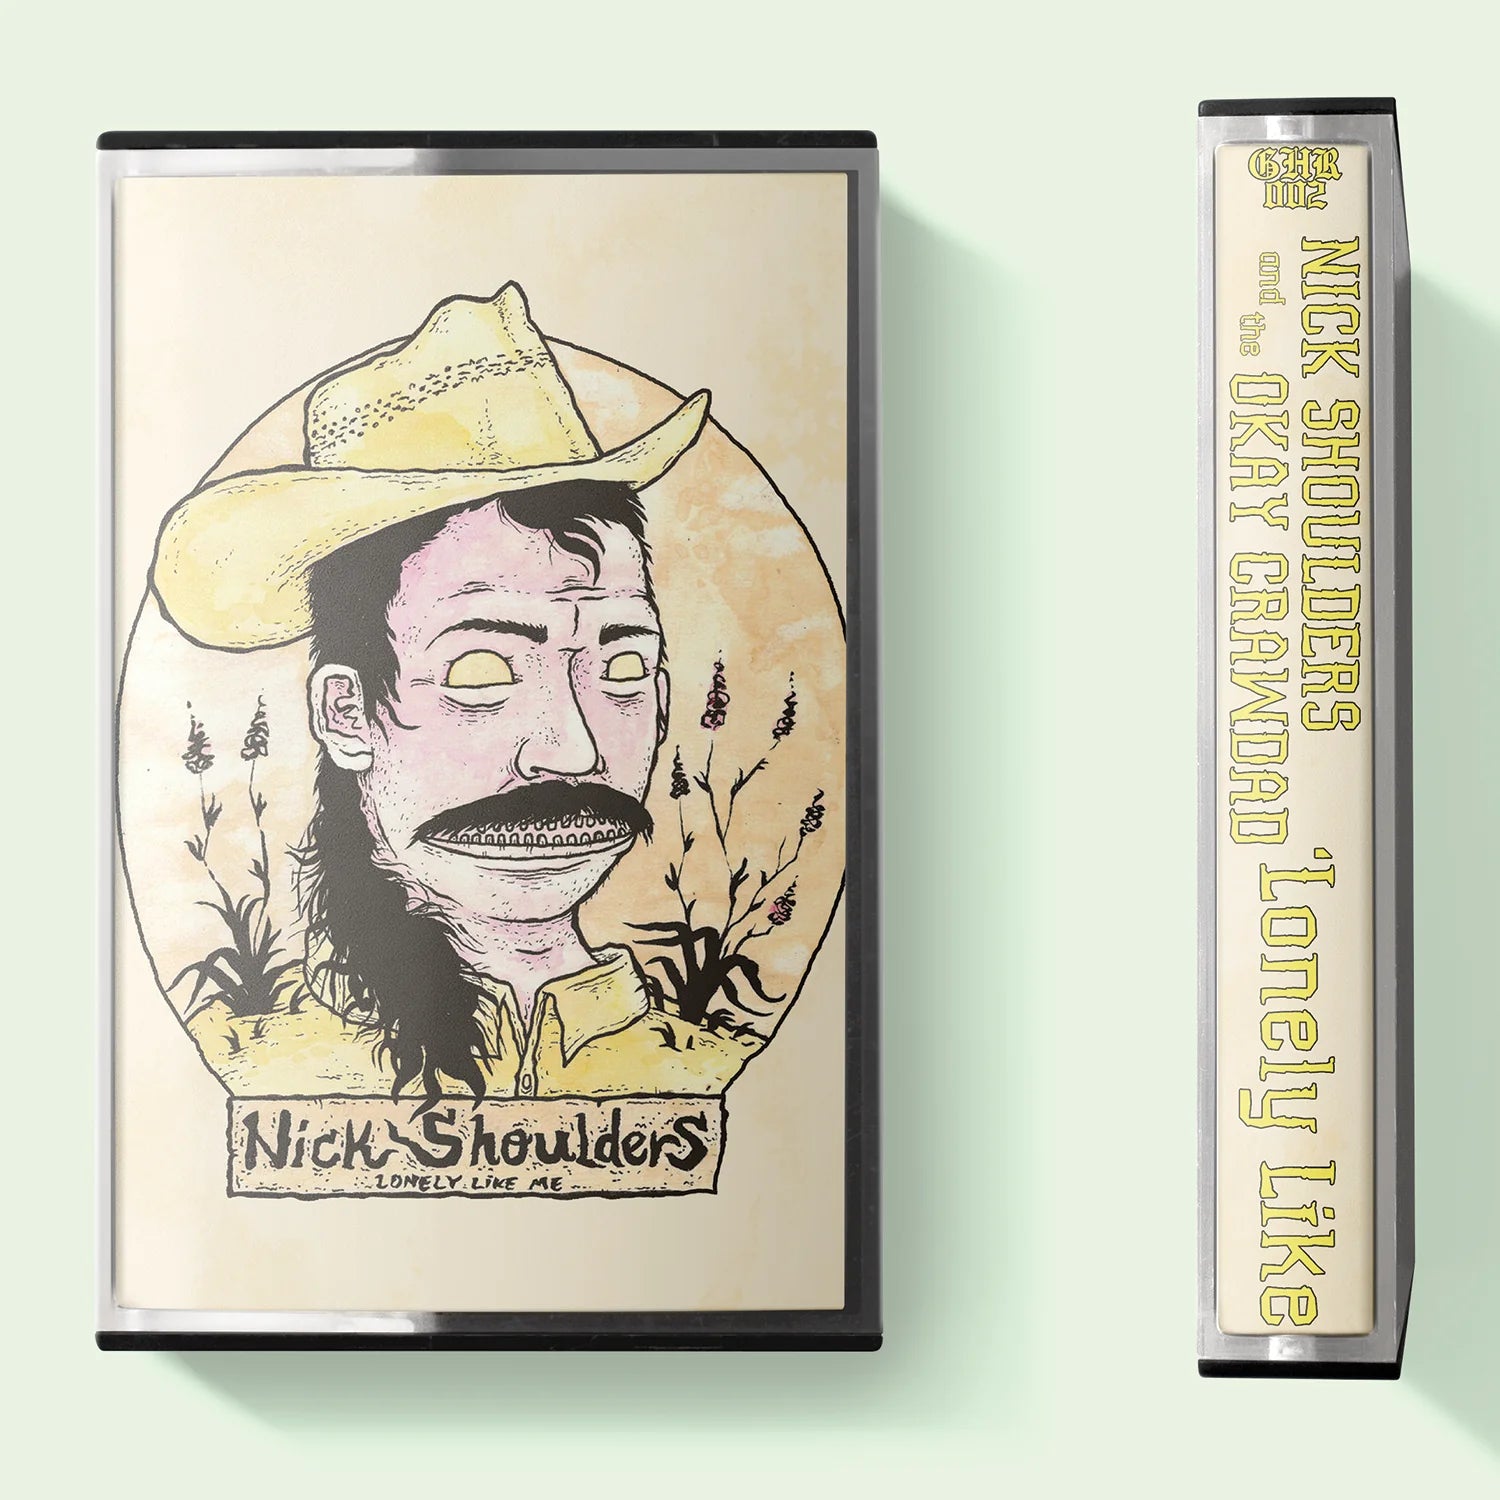 Nick Shoulders - "Lonely Like Me" Cassette